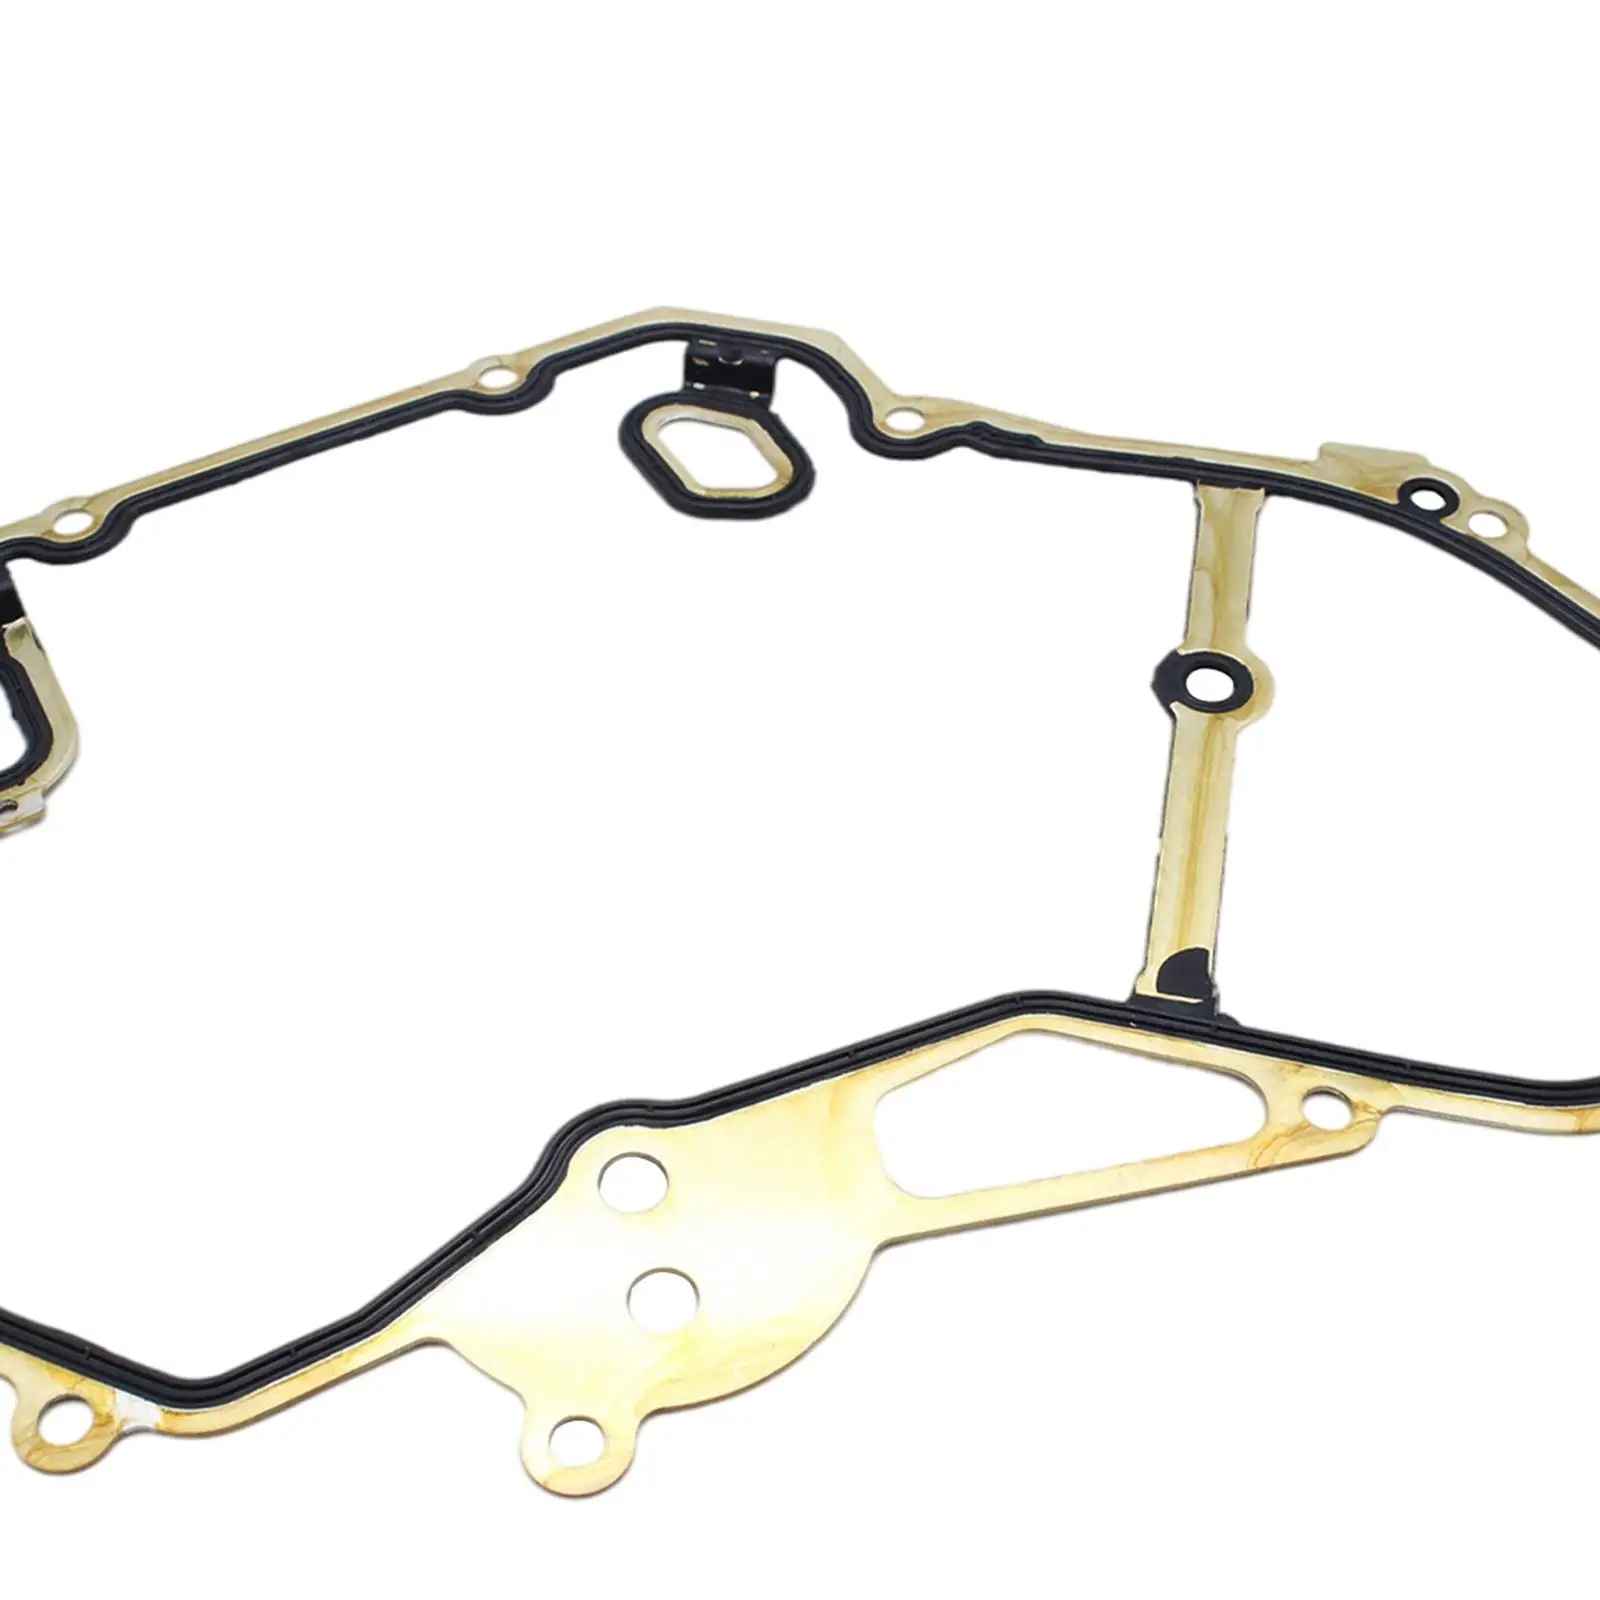 Timing Cover Gasket, Parts Car 14130912 Replace, Accessories Fit for  HHR ,  Ltz, Hybrid  L